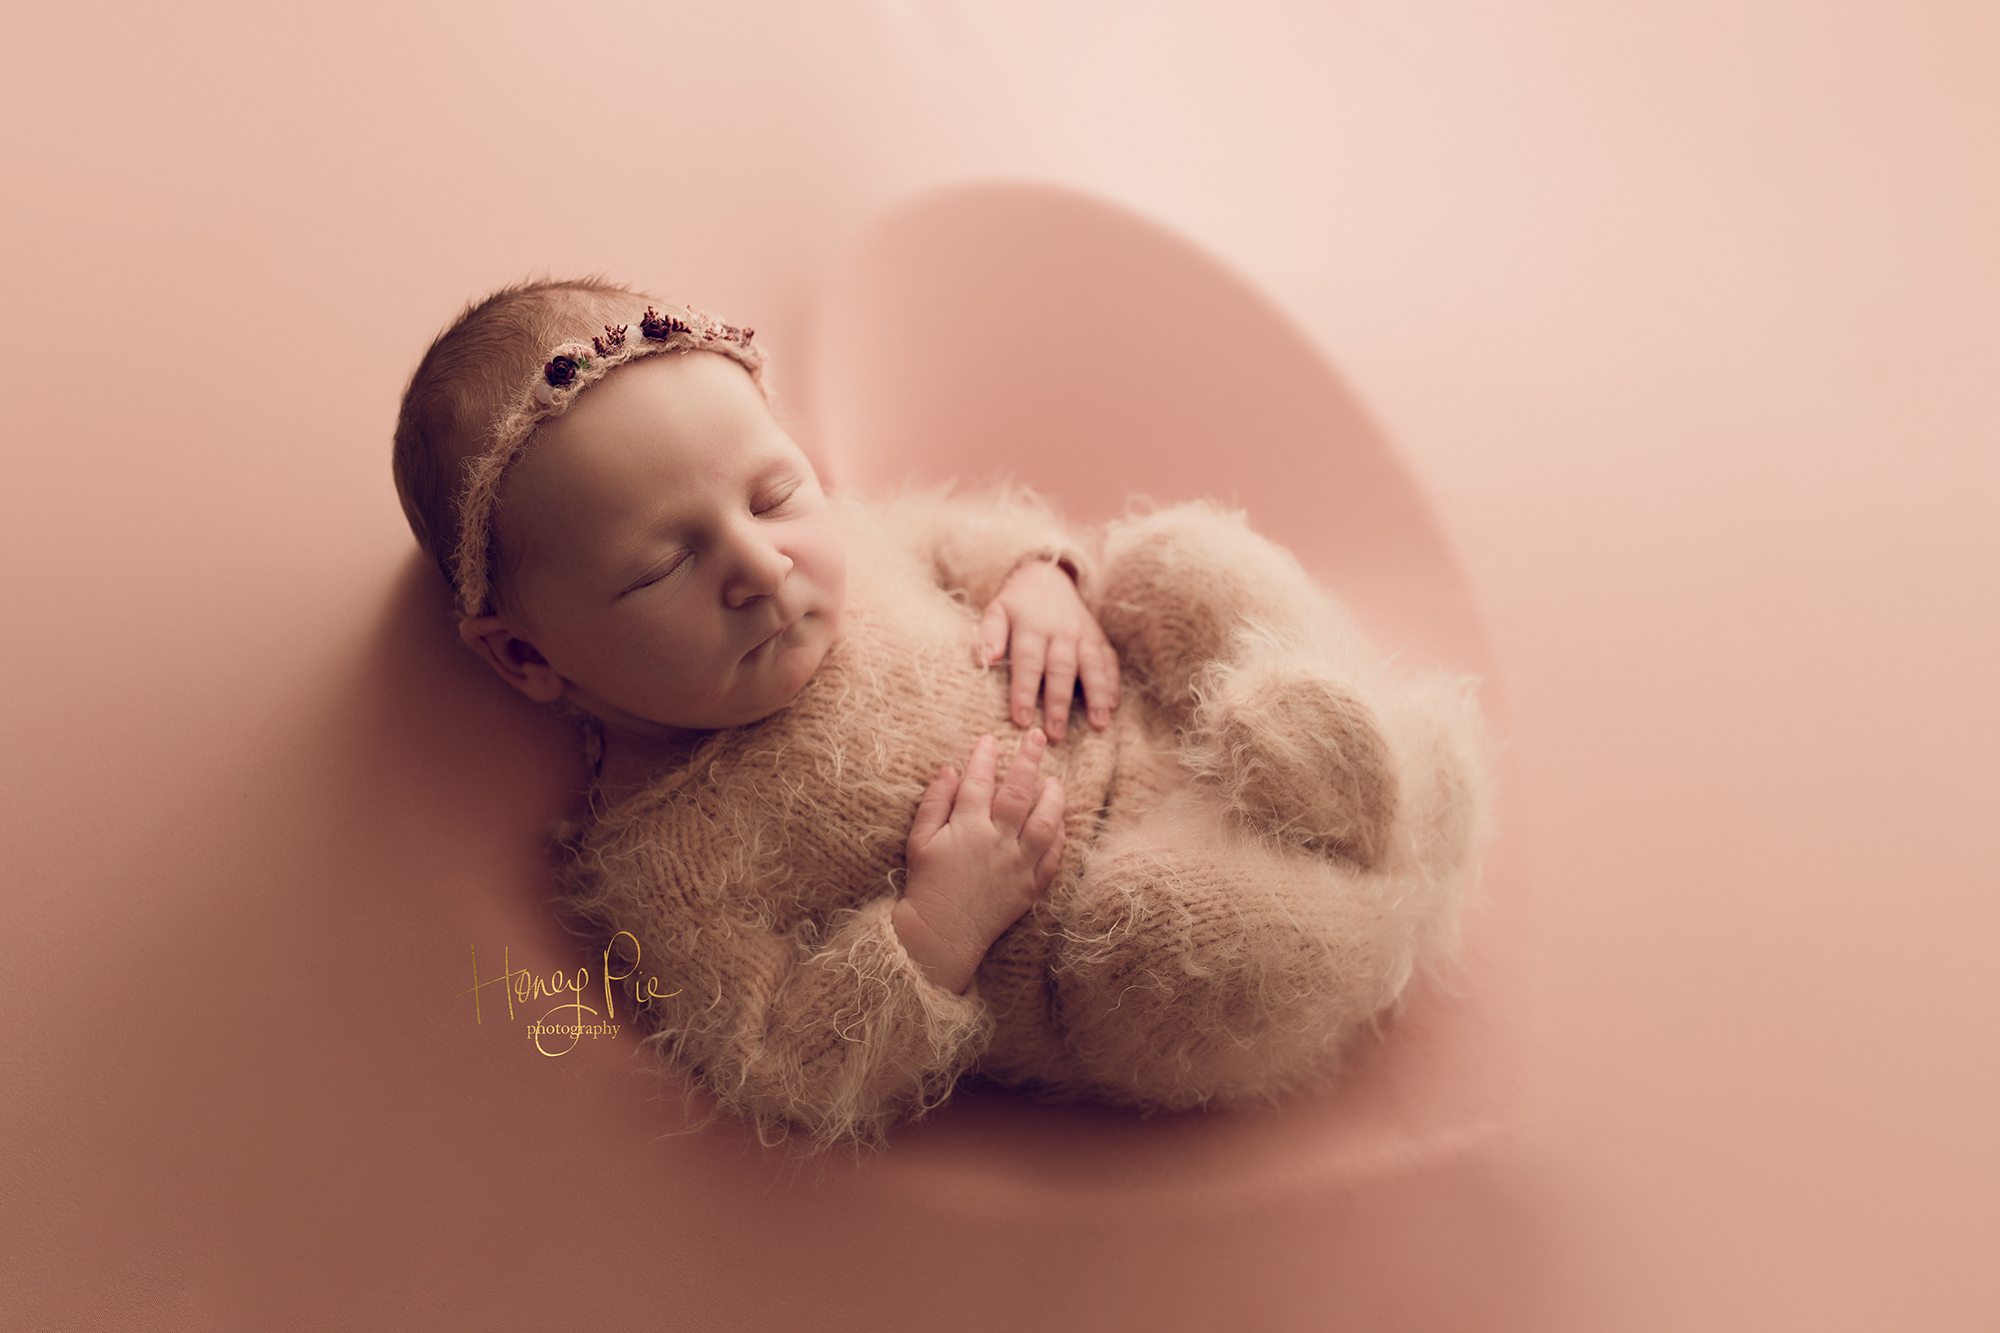 Sleeping newborn baby in a heart shaped bowl during photoshoot in Sussex